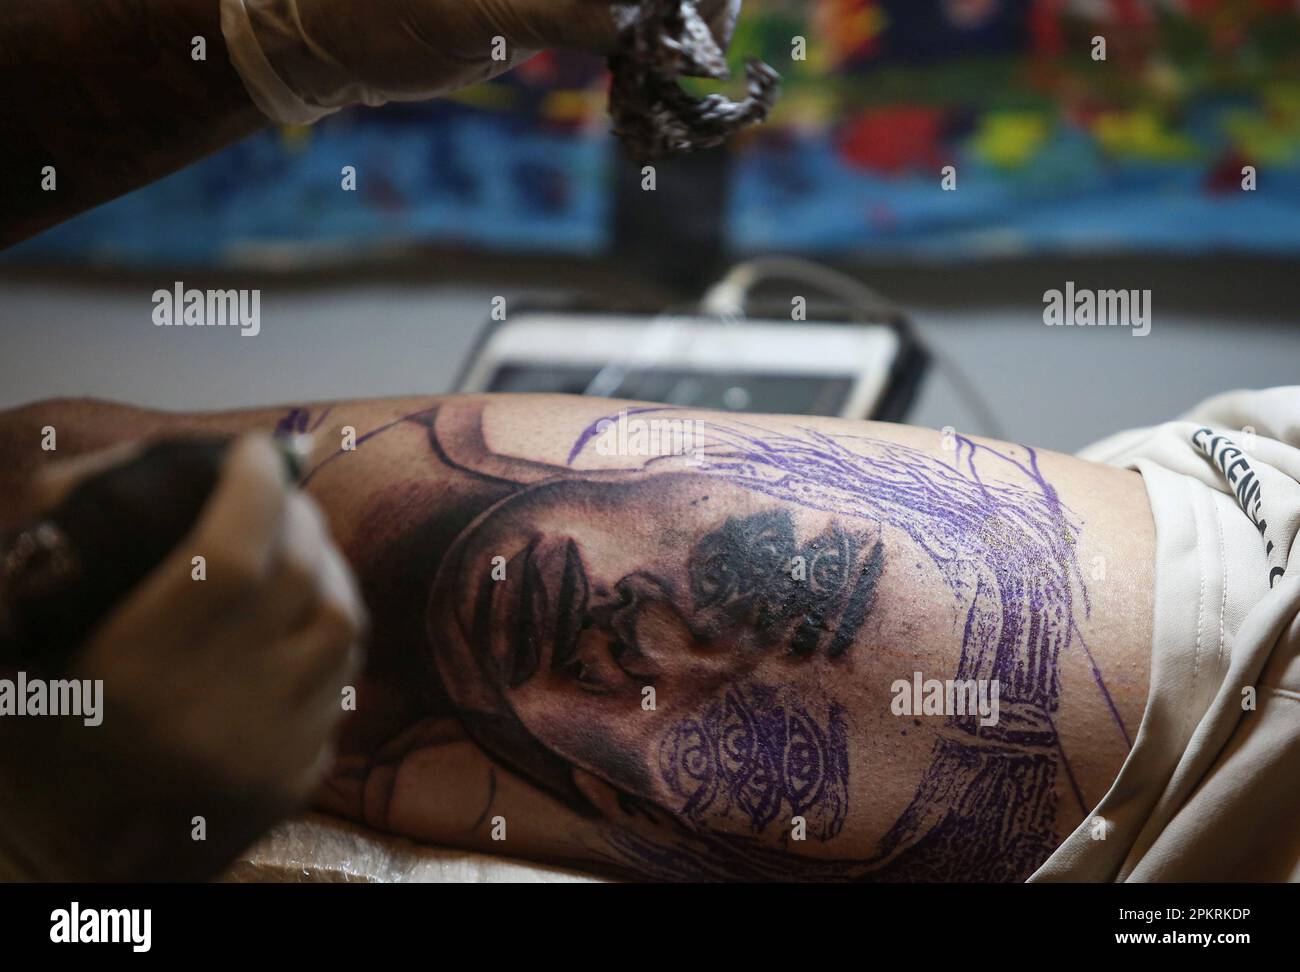 The art of inking is expressed at its best through freehand tattoos, says  celebrated tattoo artist Aakash Chandani